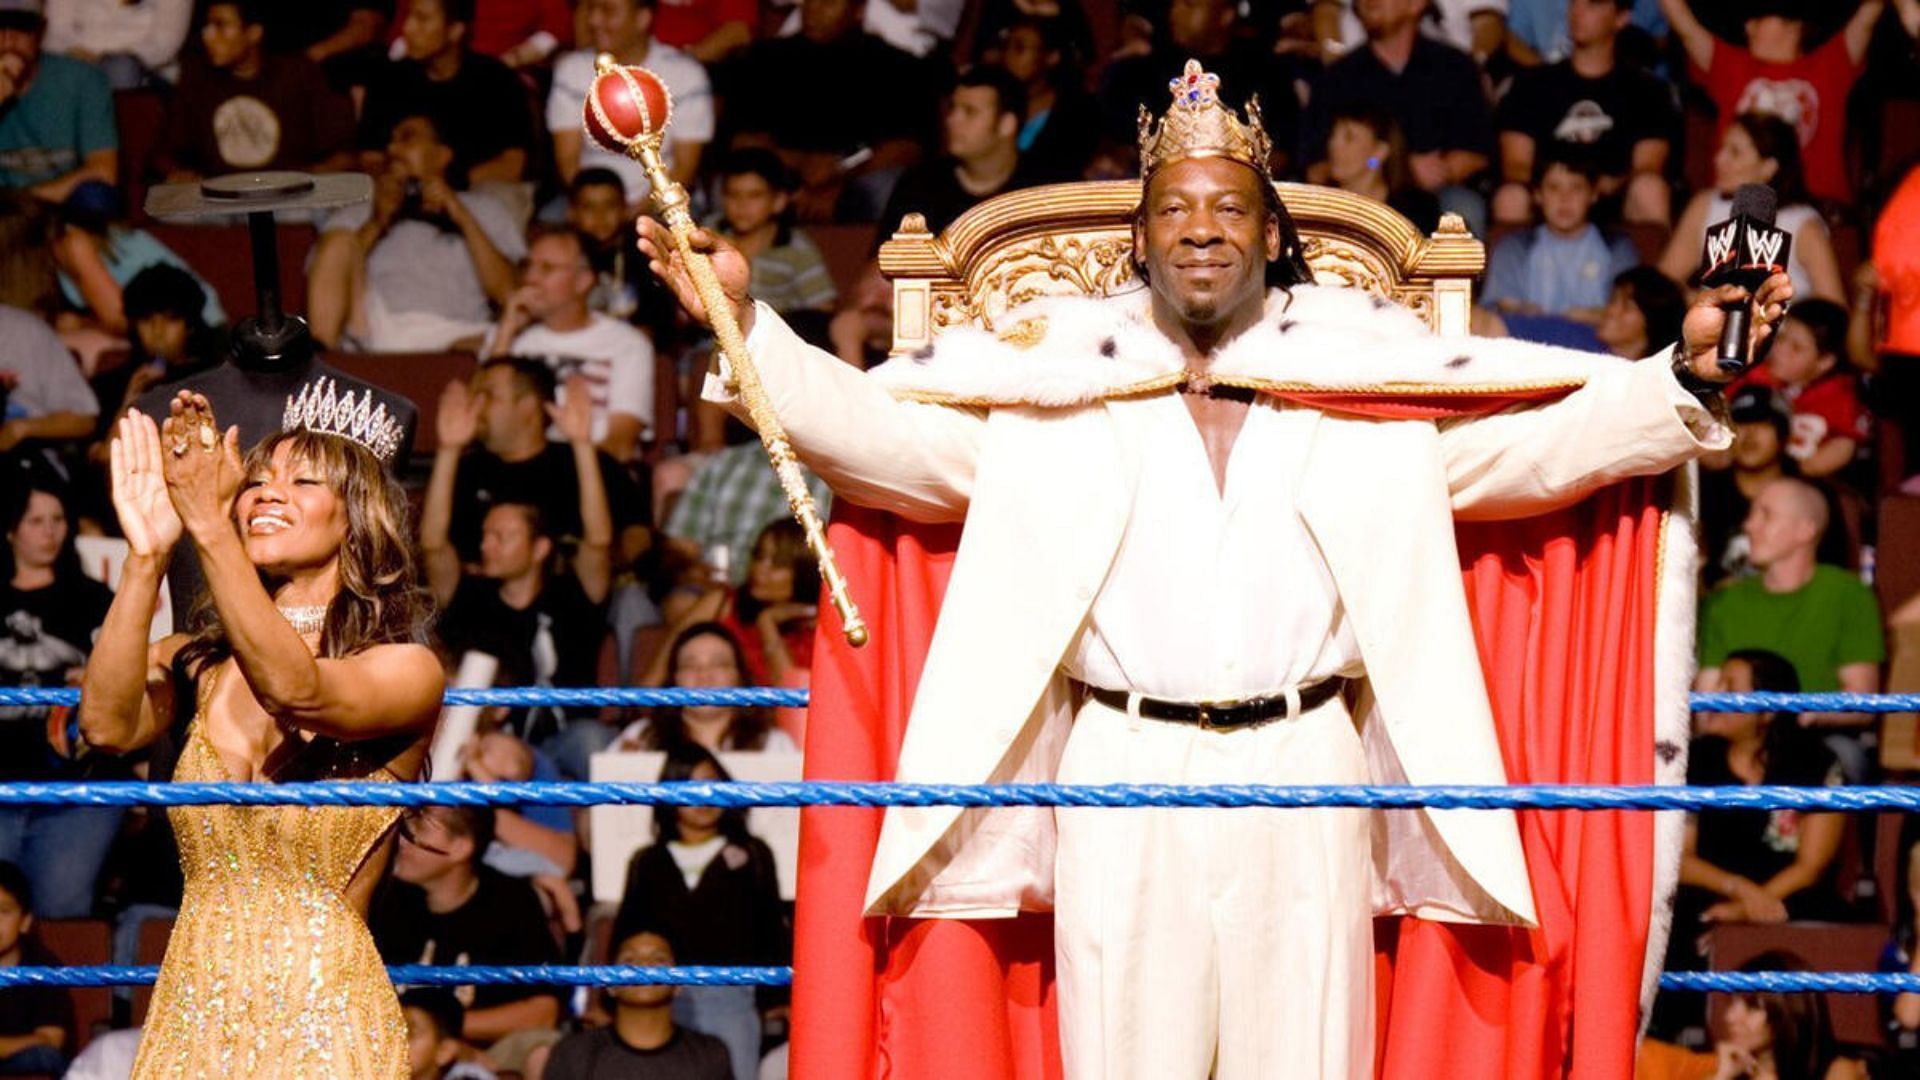 The King of The Ring Tournament has a long, storied history.